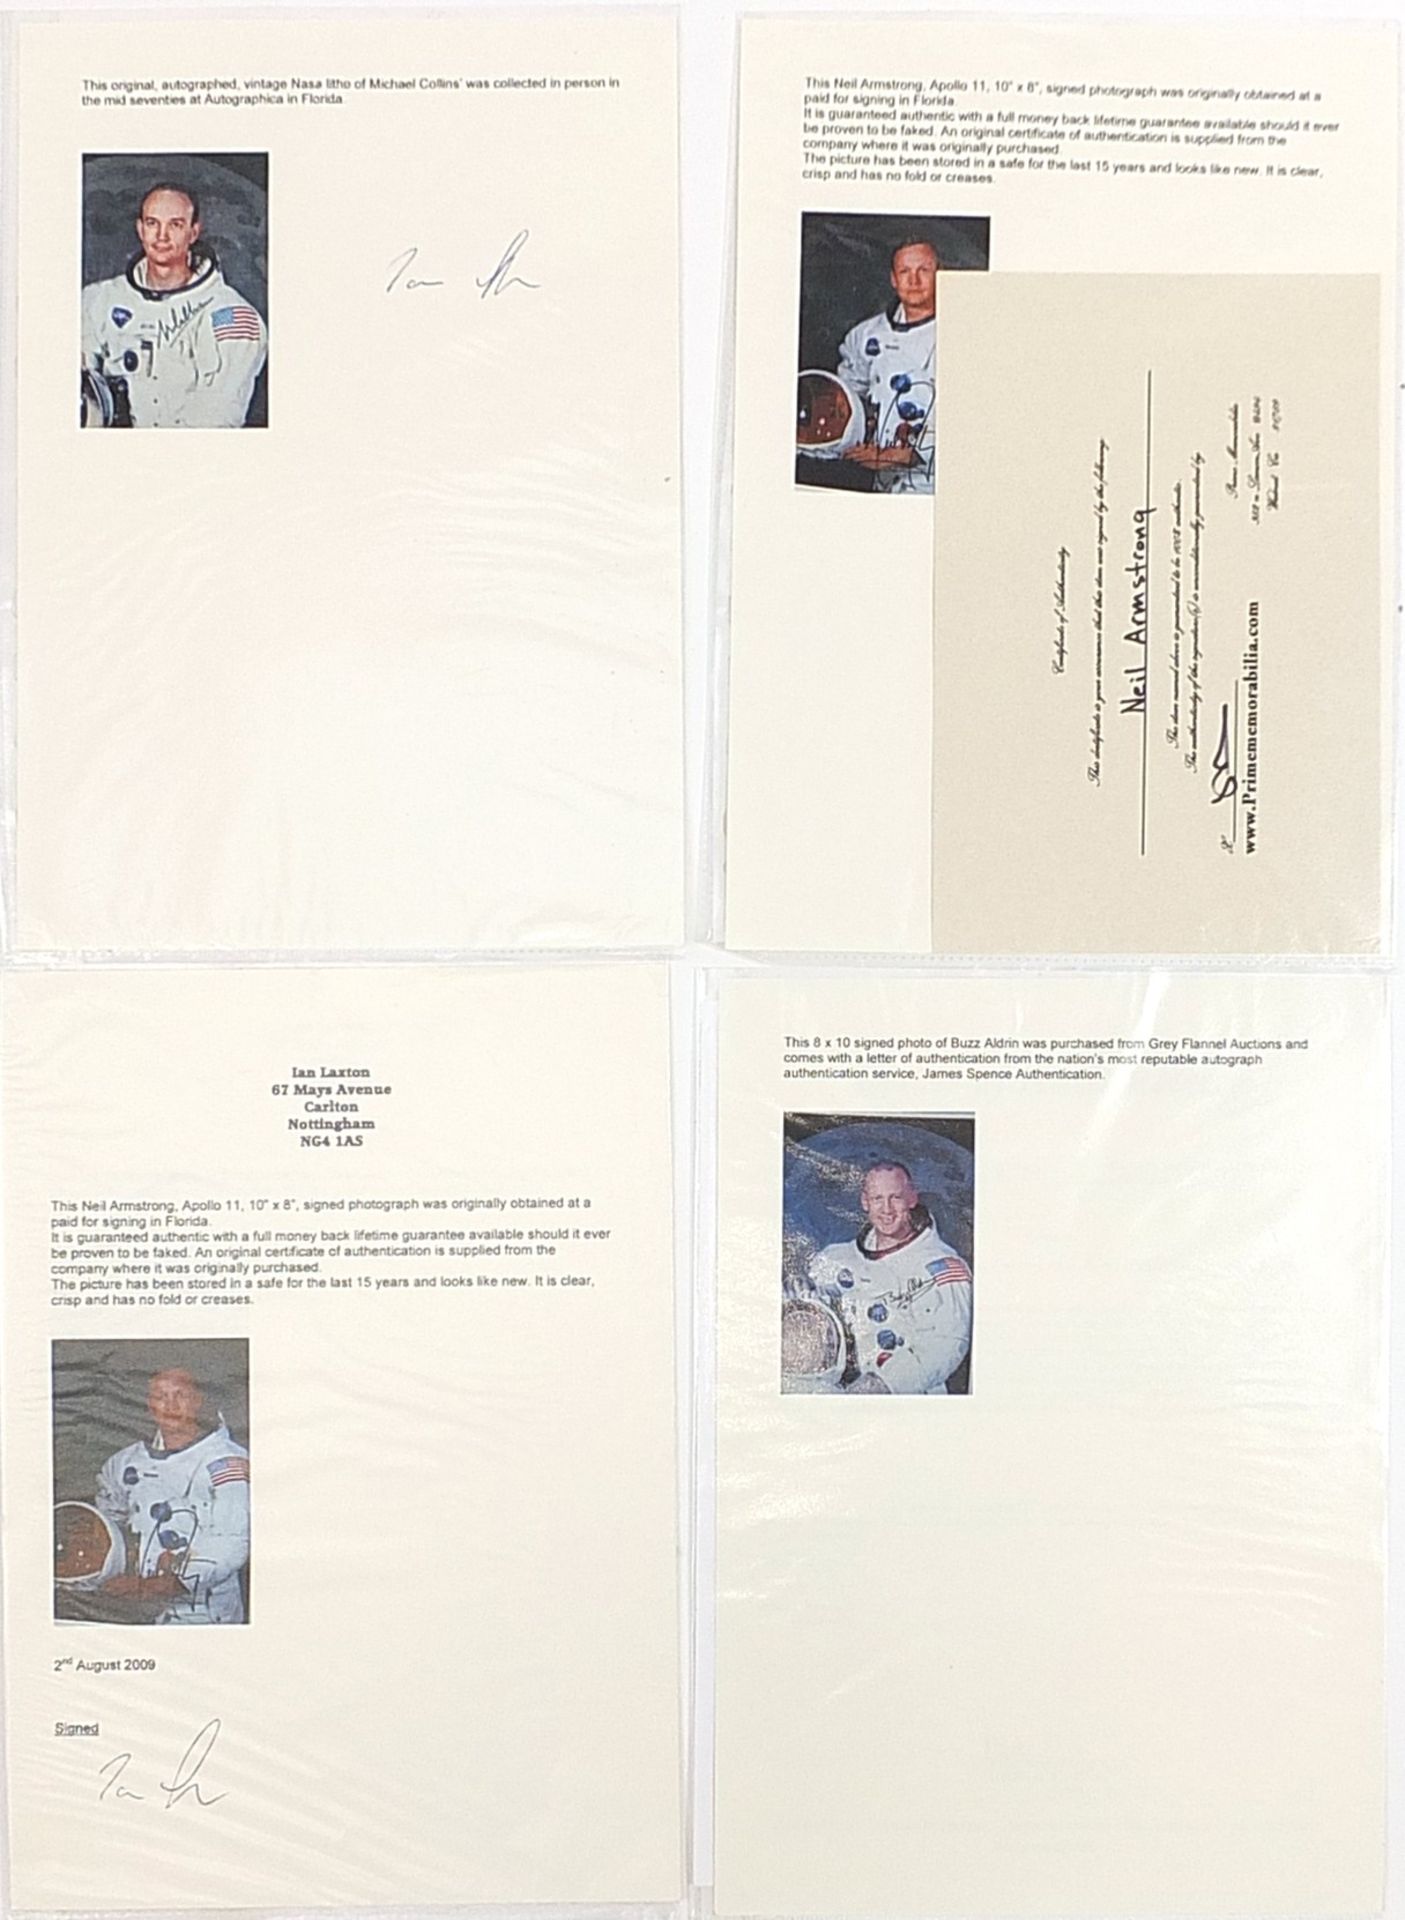 Neil Armstrong, Edwin Aldrin Junior and Michael Collins, Apollo 11 ink signatures on photographs, - Image 7 of 7